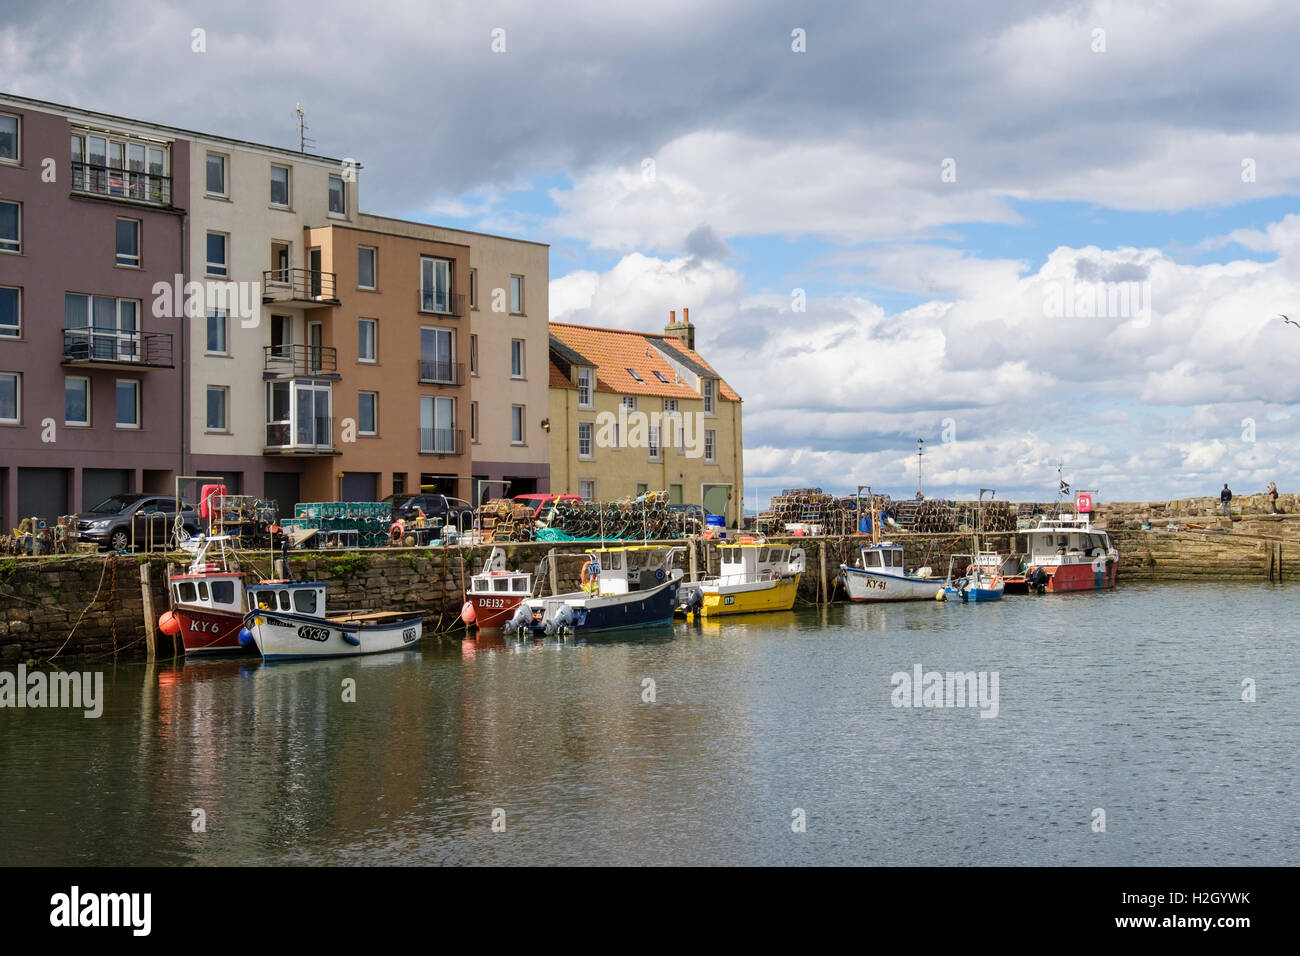 Fishing boats moored in the walled harbour. Royal Burgh St Andrews, Fife, Scotland, UK, Britain Stock Photo